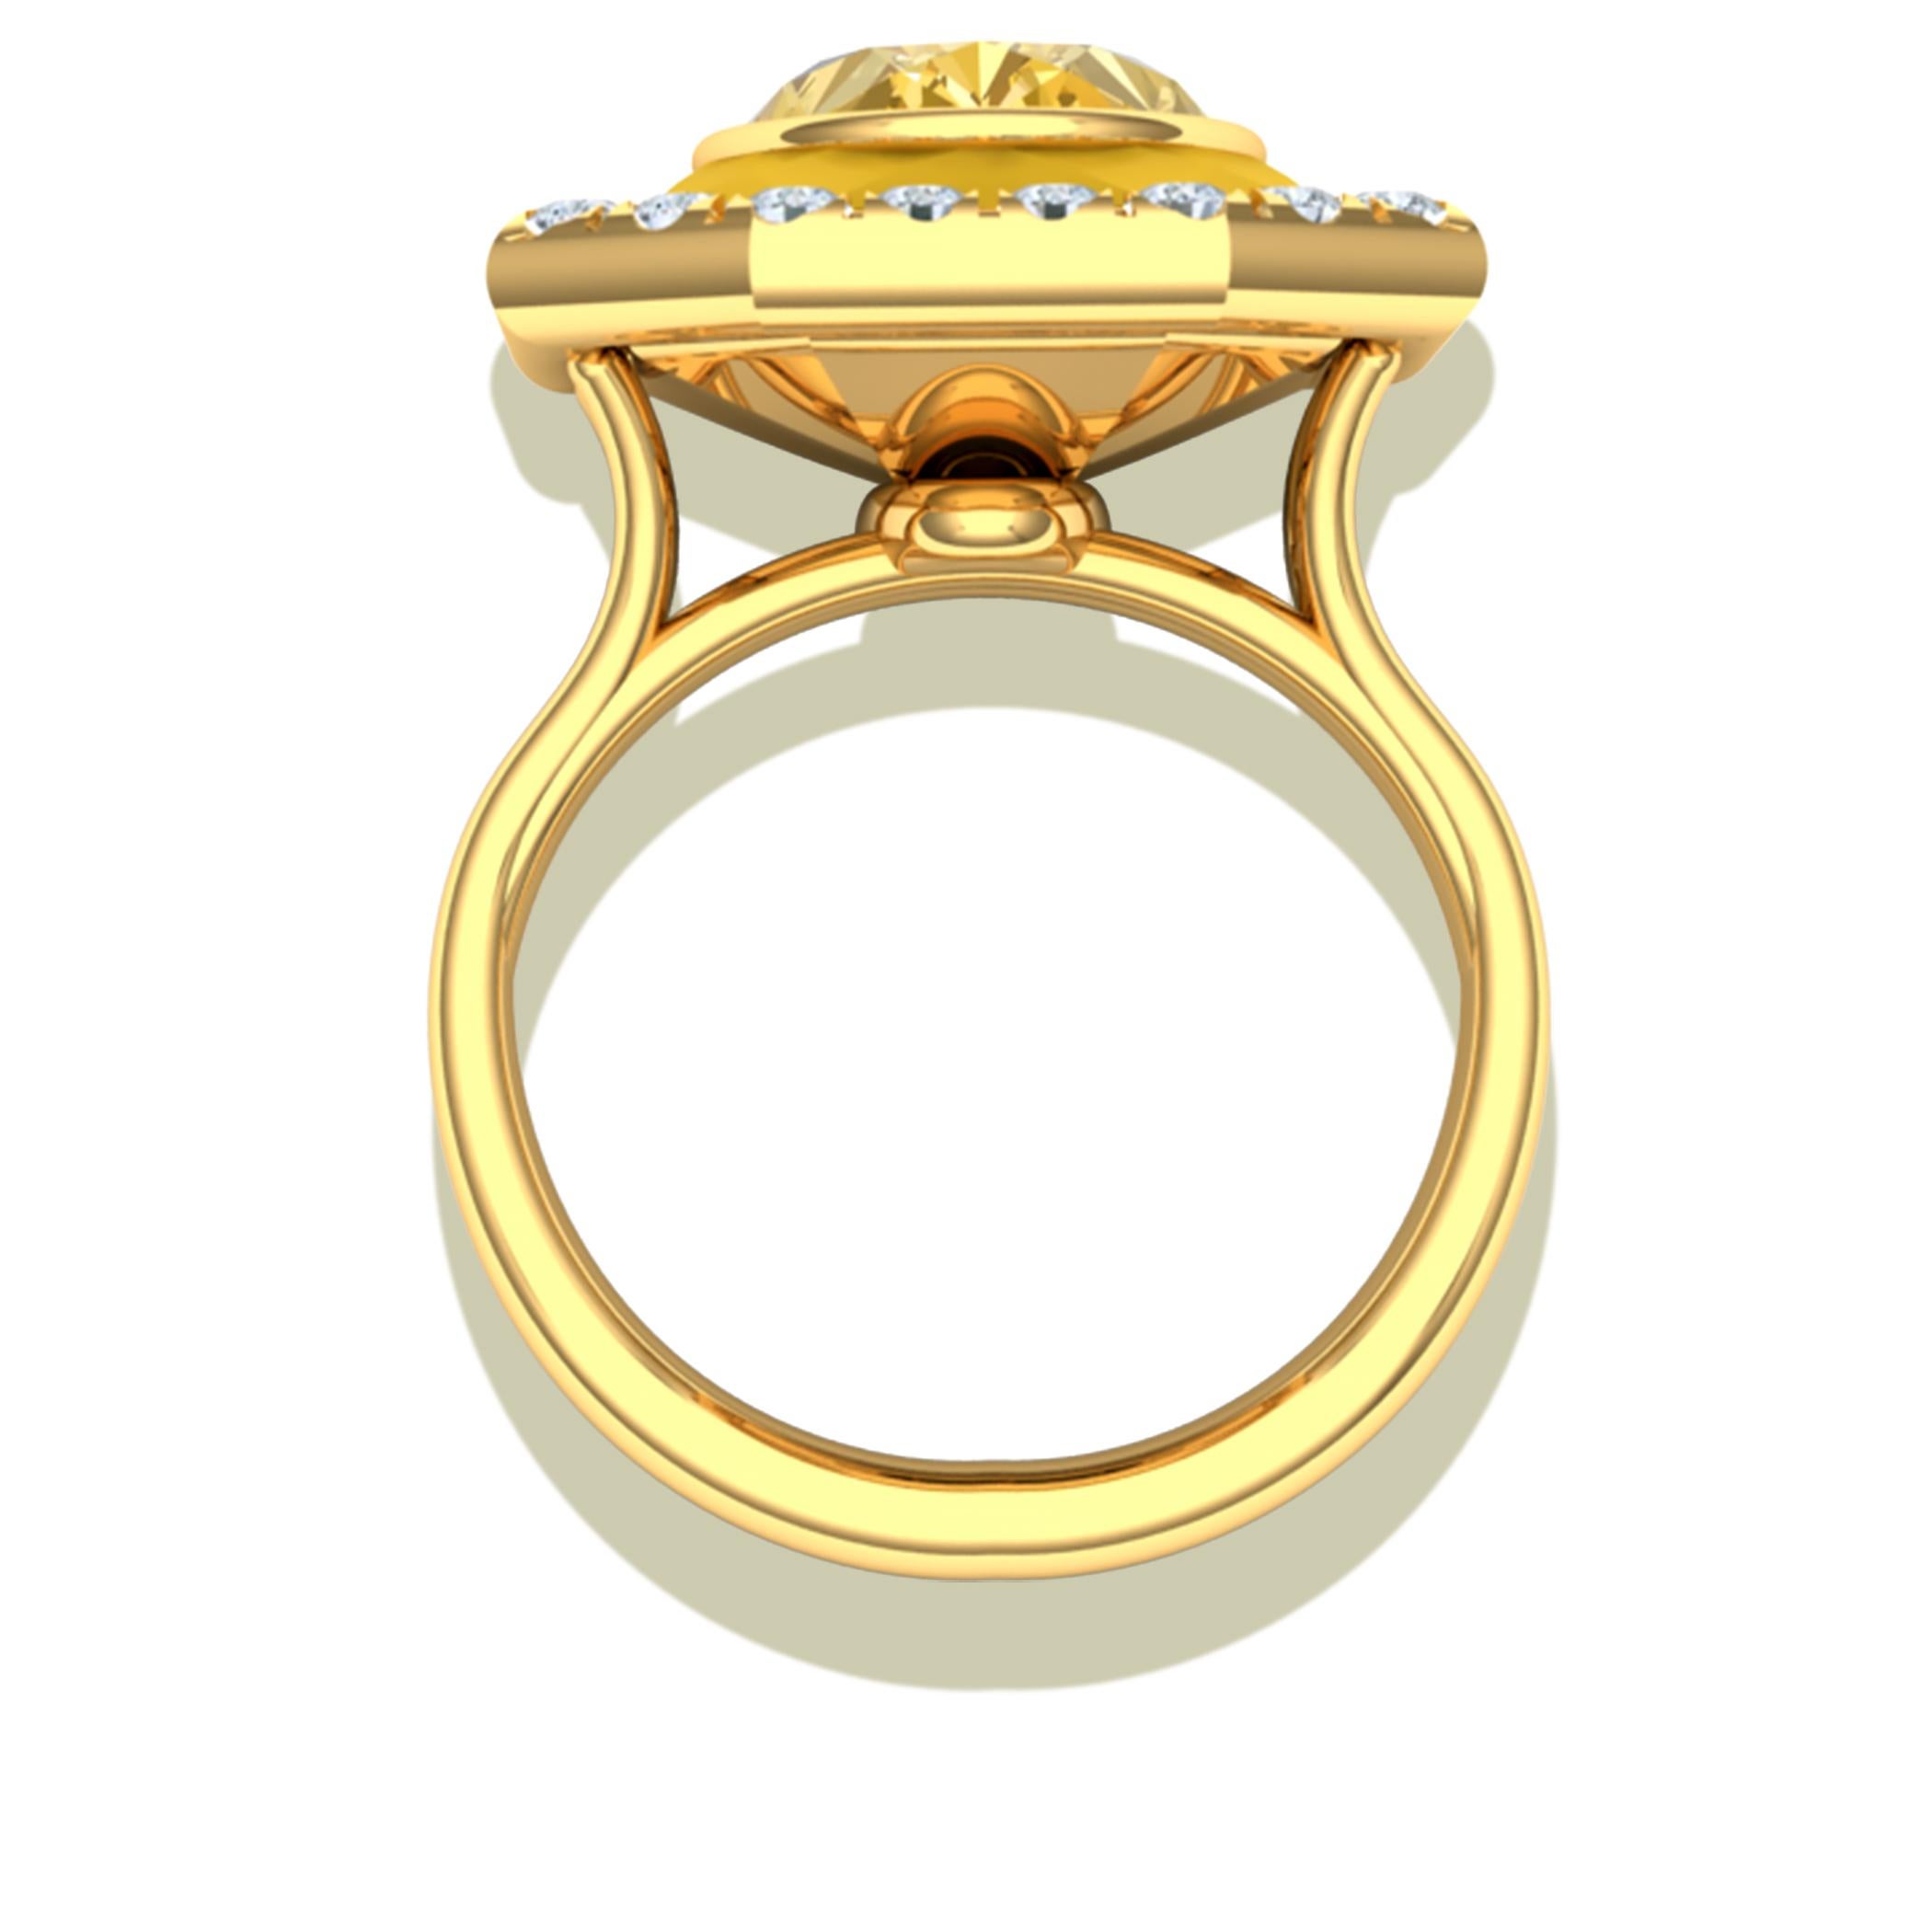 This beautiful and unique yellow diamond ring has something you will see in no other jewelry.  We've taken the classic world of yellow diamonds and twisted it with a modern touch of semi-paque yellow Chalcedony.  This combination pairs refraction